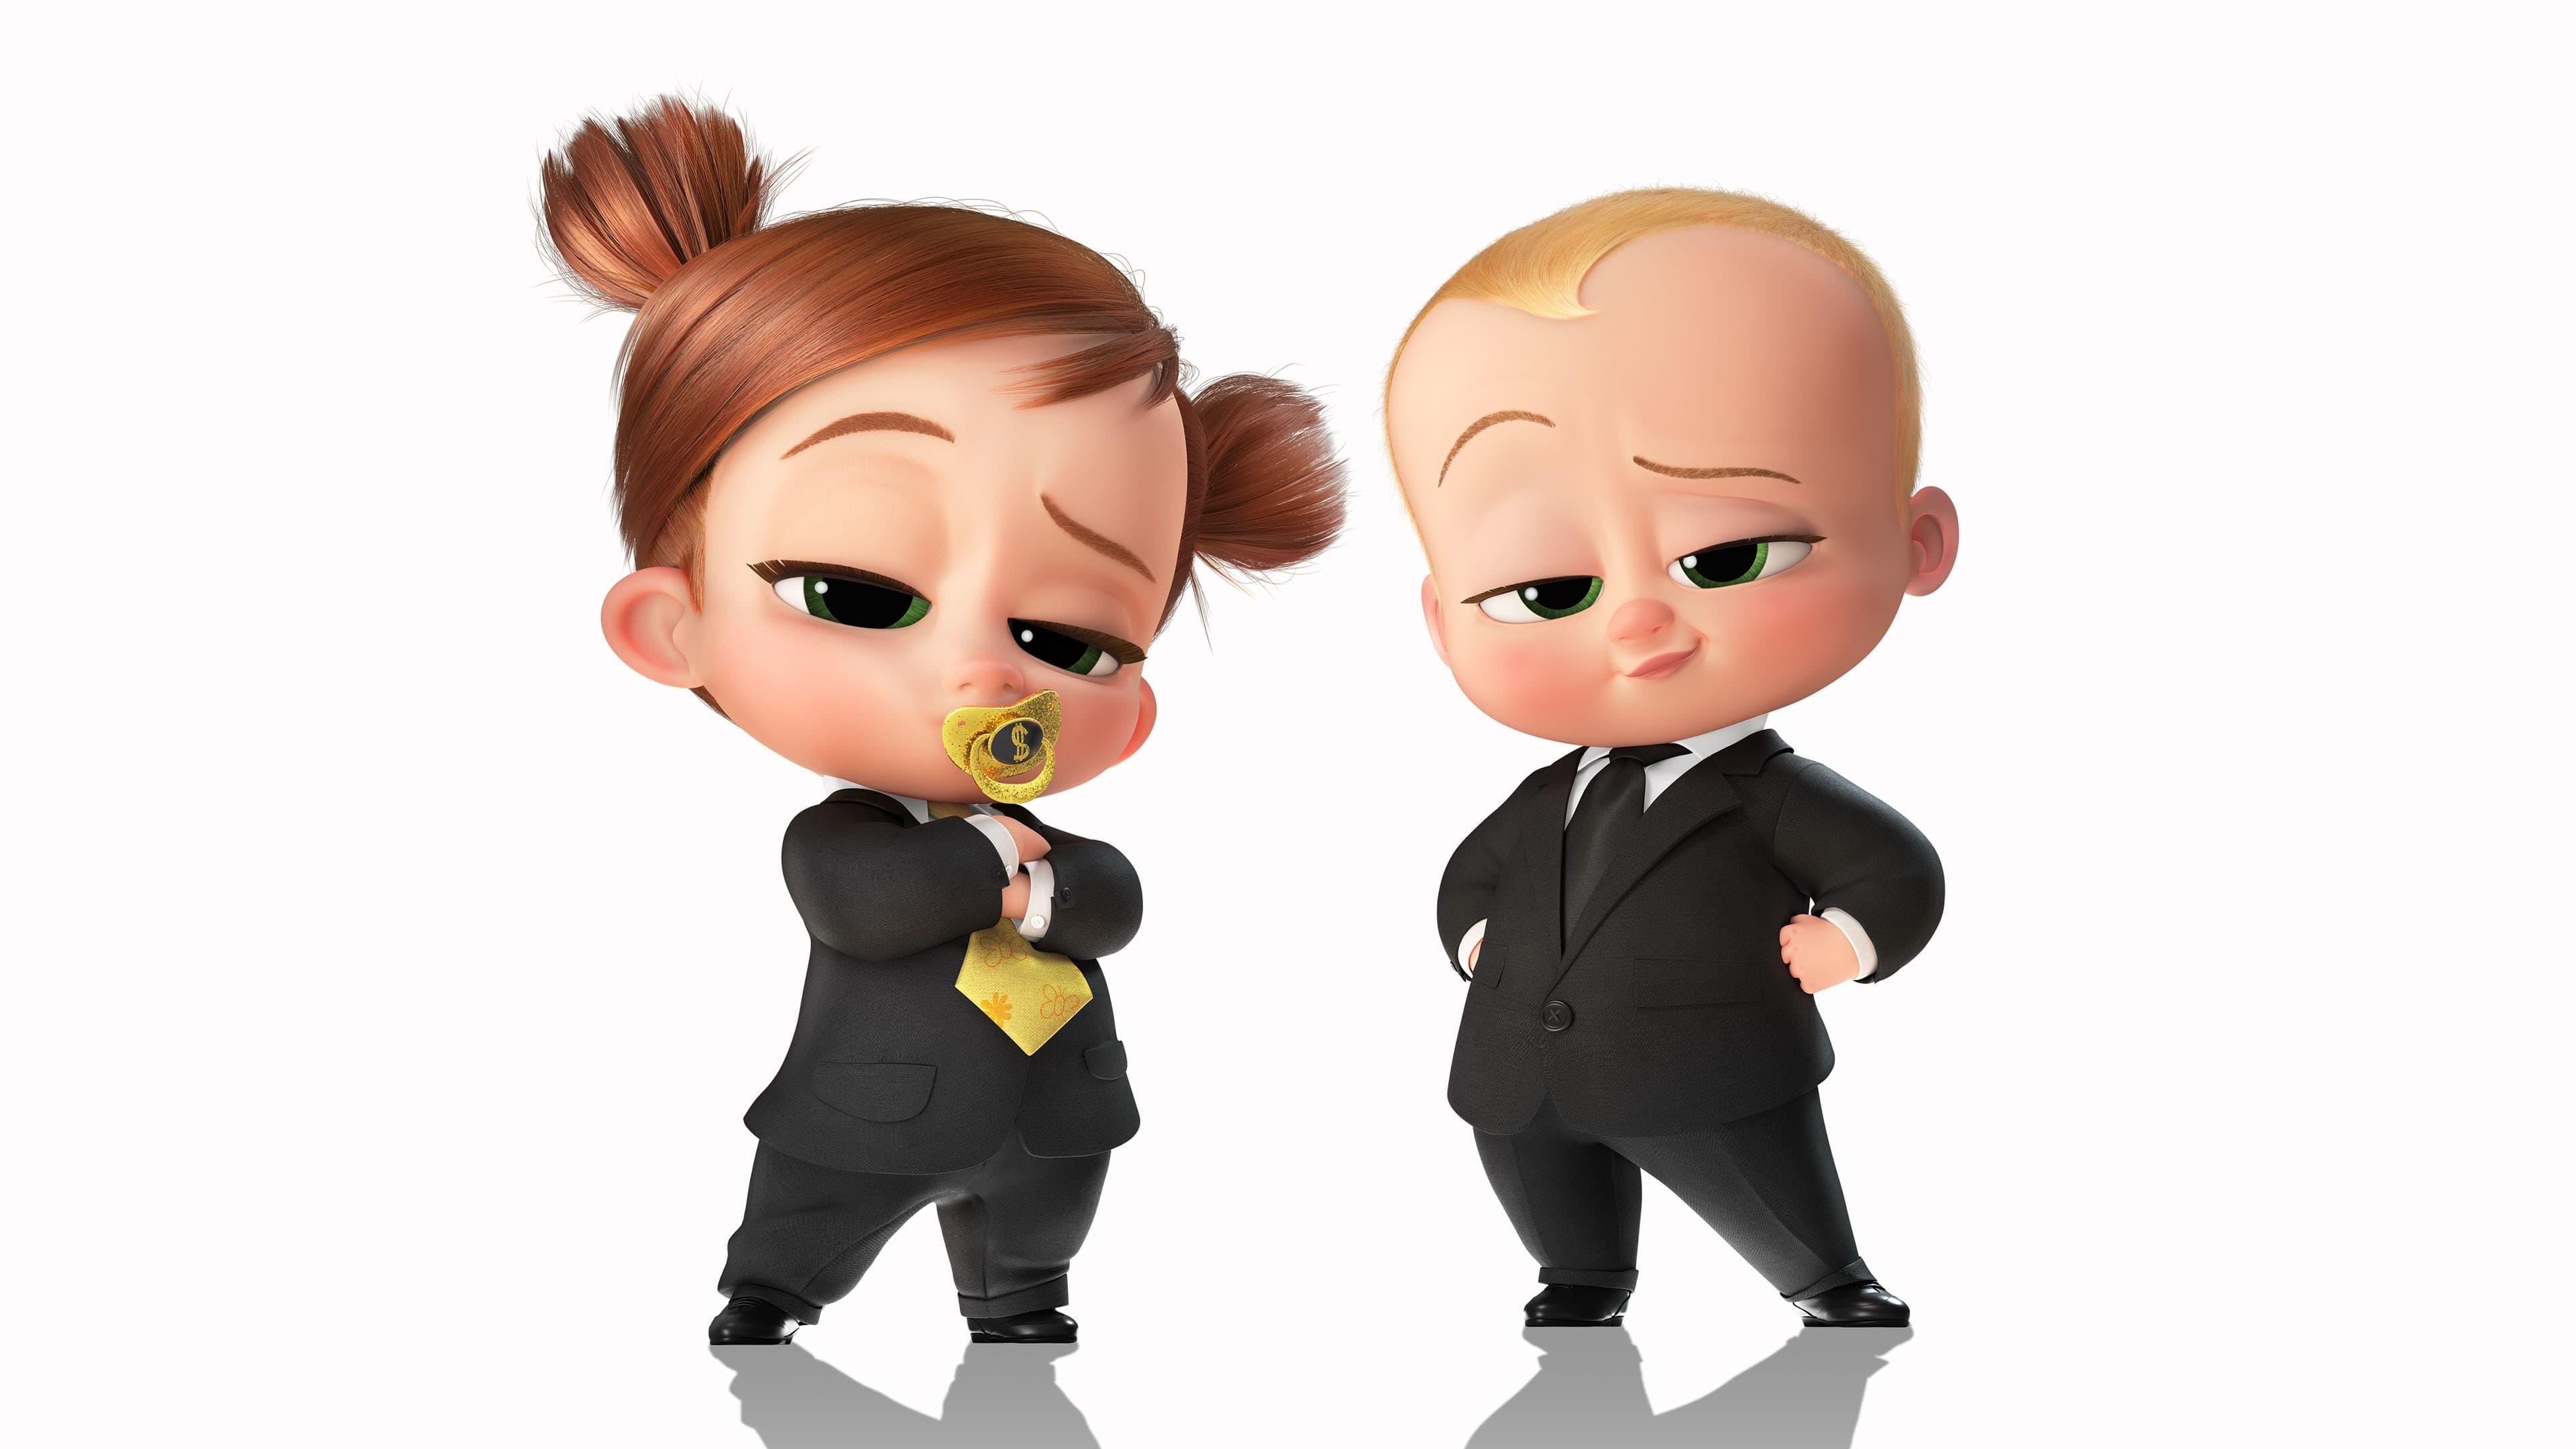 The Boss Baby: Family Business backdrop